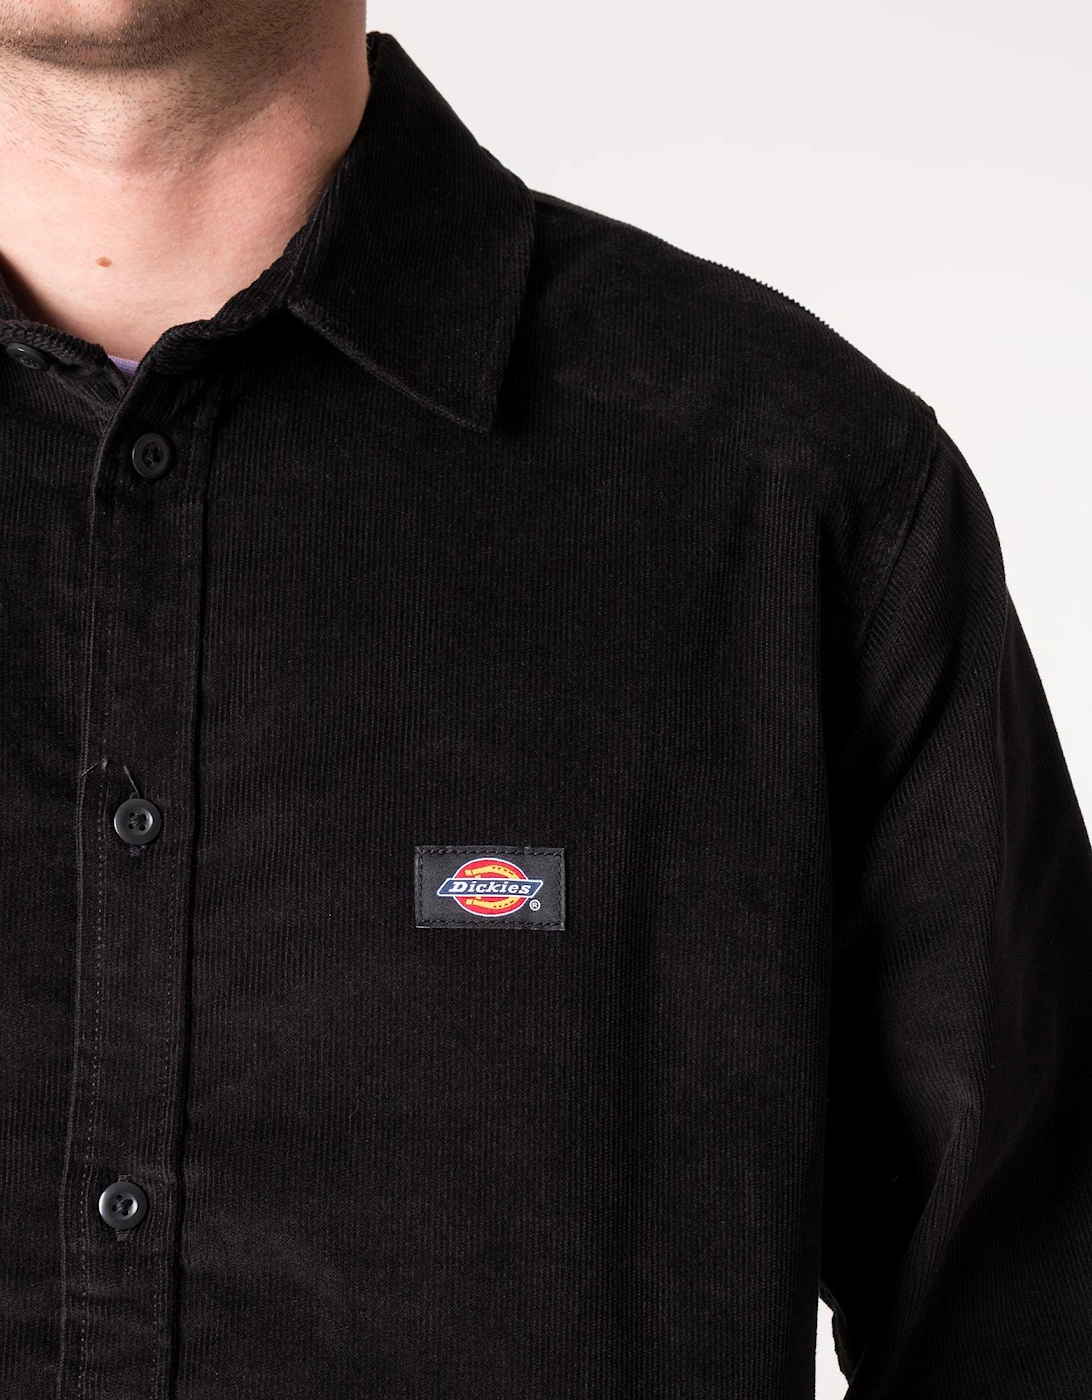 Relaxed Fit Corduroy Wilsonville Shirt